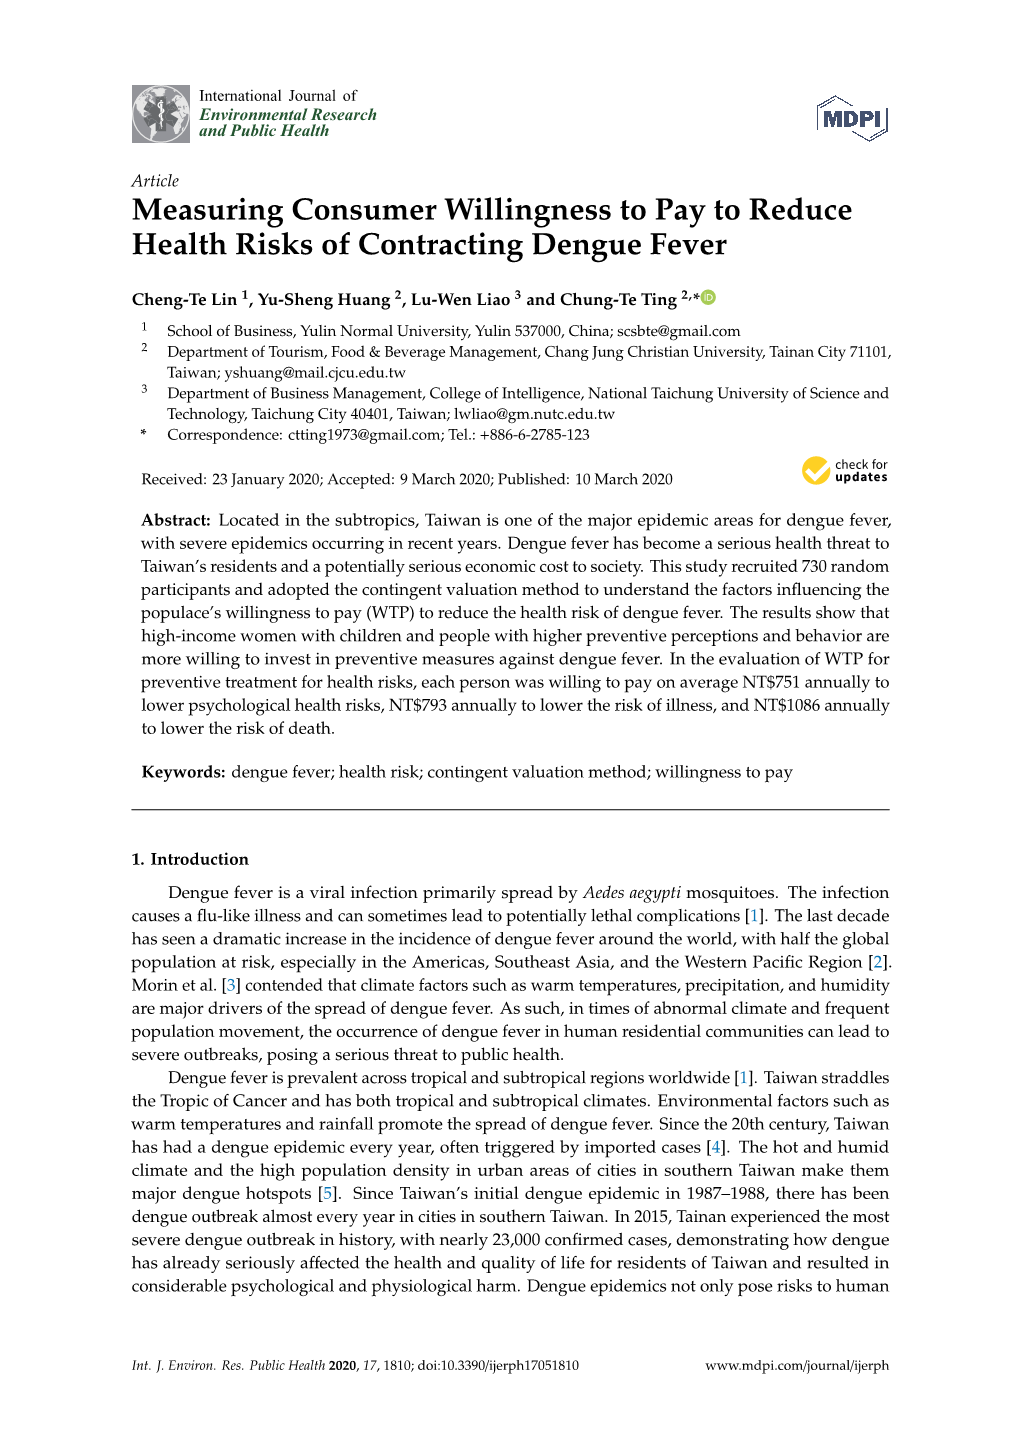 Measuring Consumer Willingness to Pay to Reduce Health Risks of Contracting Dengue Fever